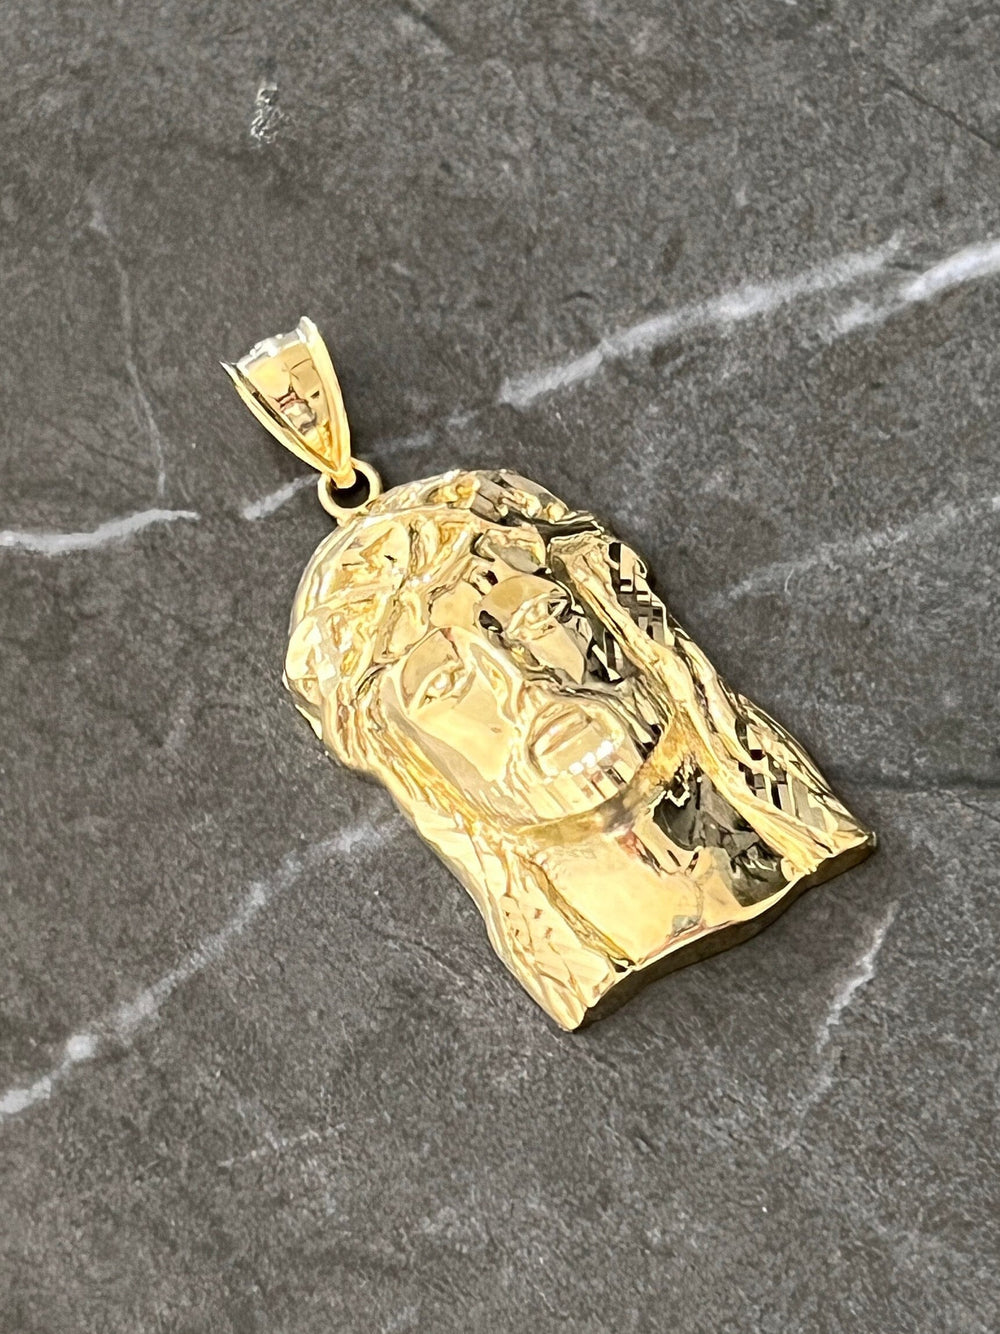 Authentic 10K Yellow Gold Textured Diamond Cut Religious Jesus Face/Head Amulet Charm/Pendant, "the Face of Jesus will Always be with You"